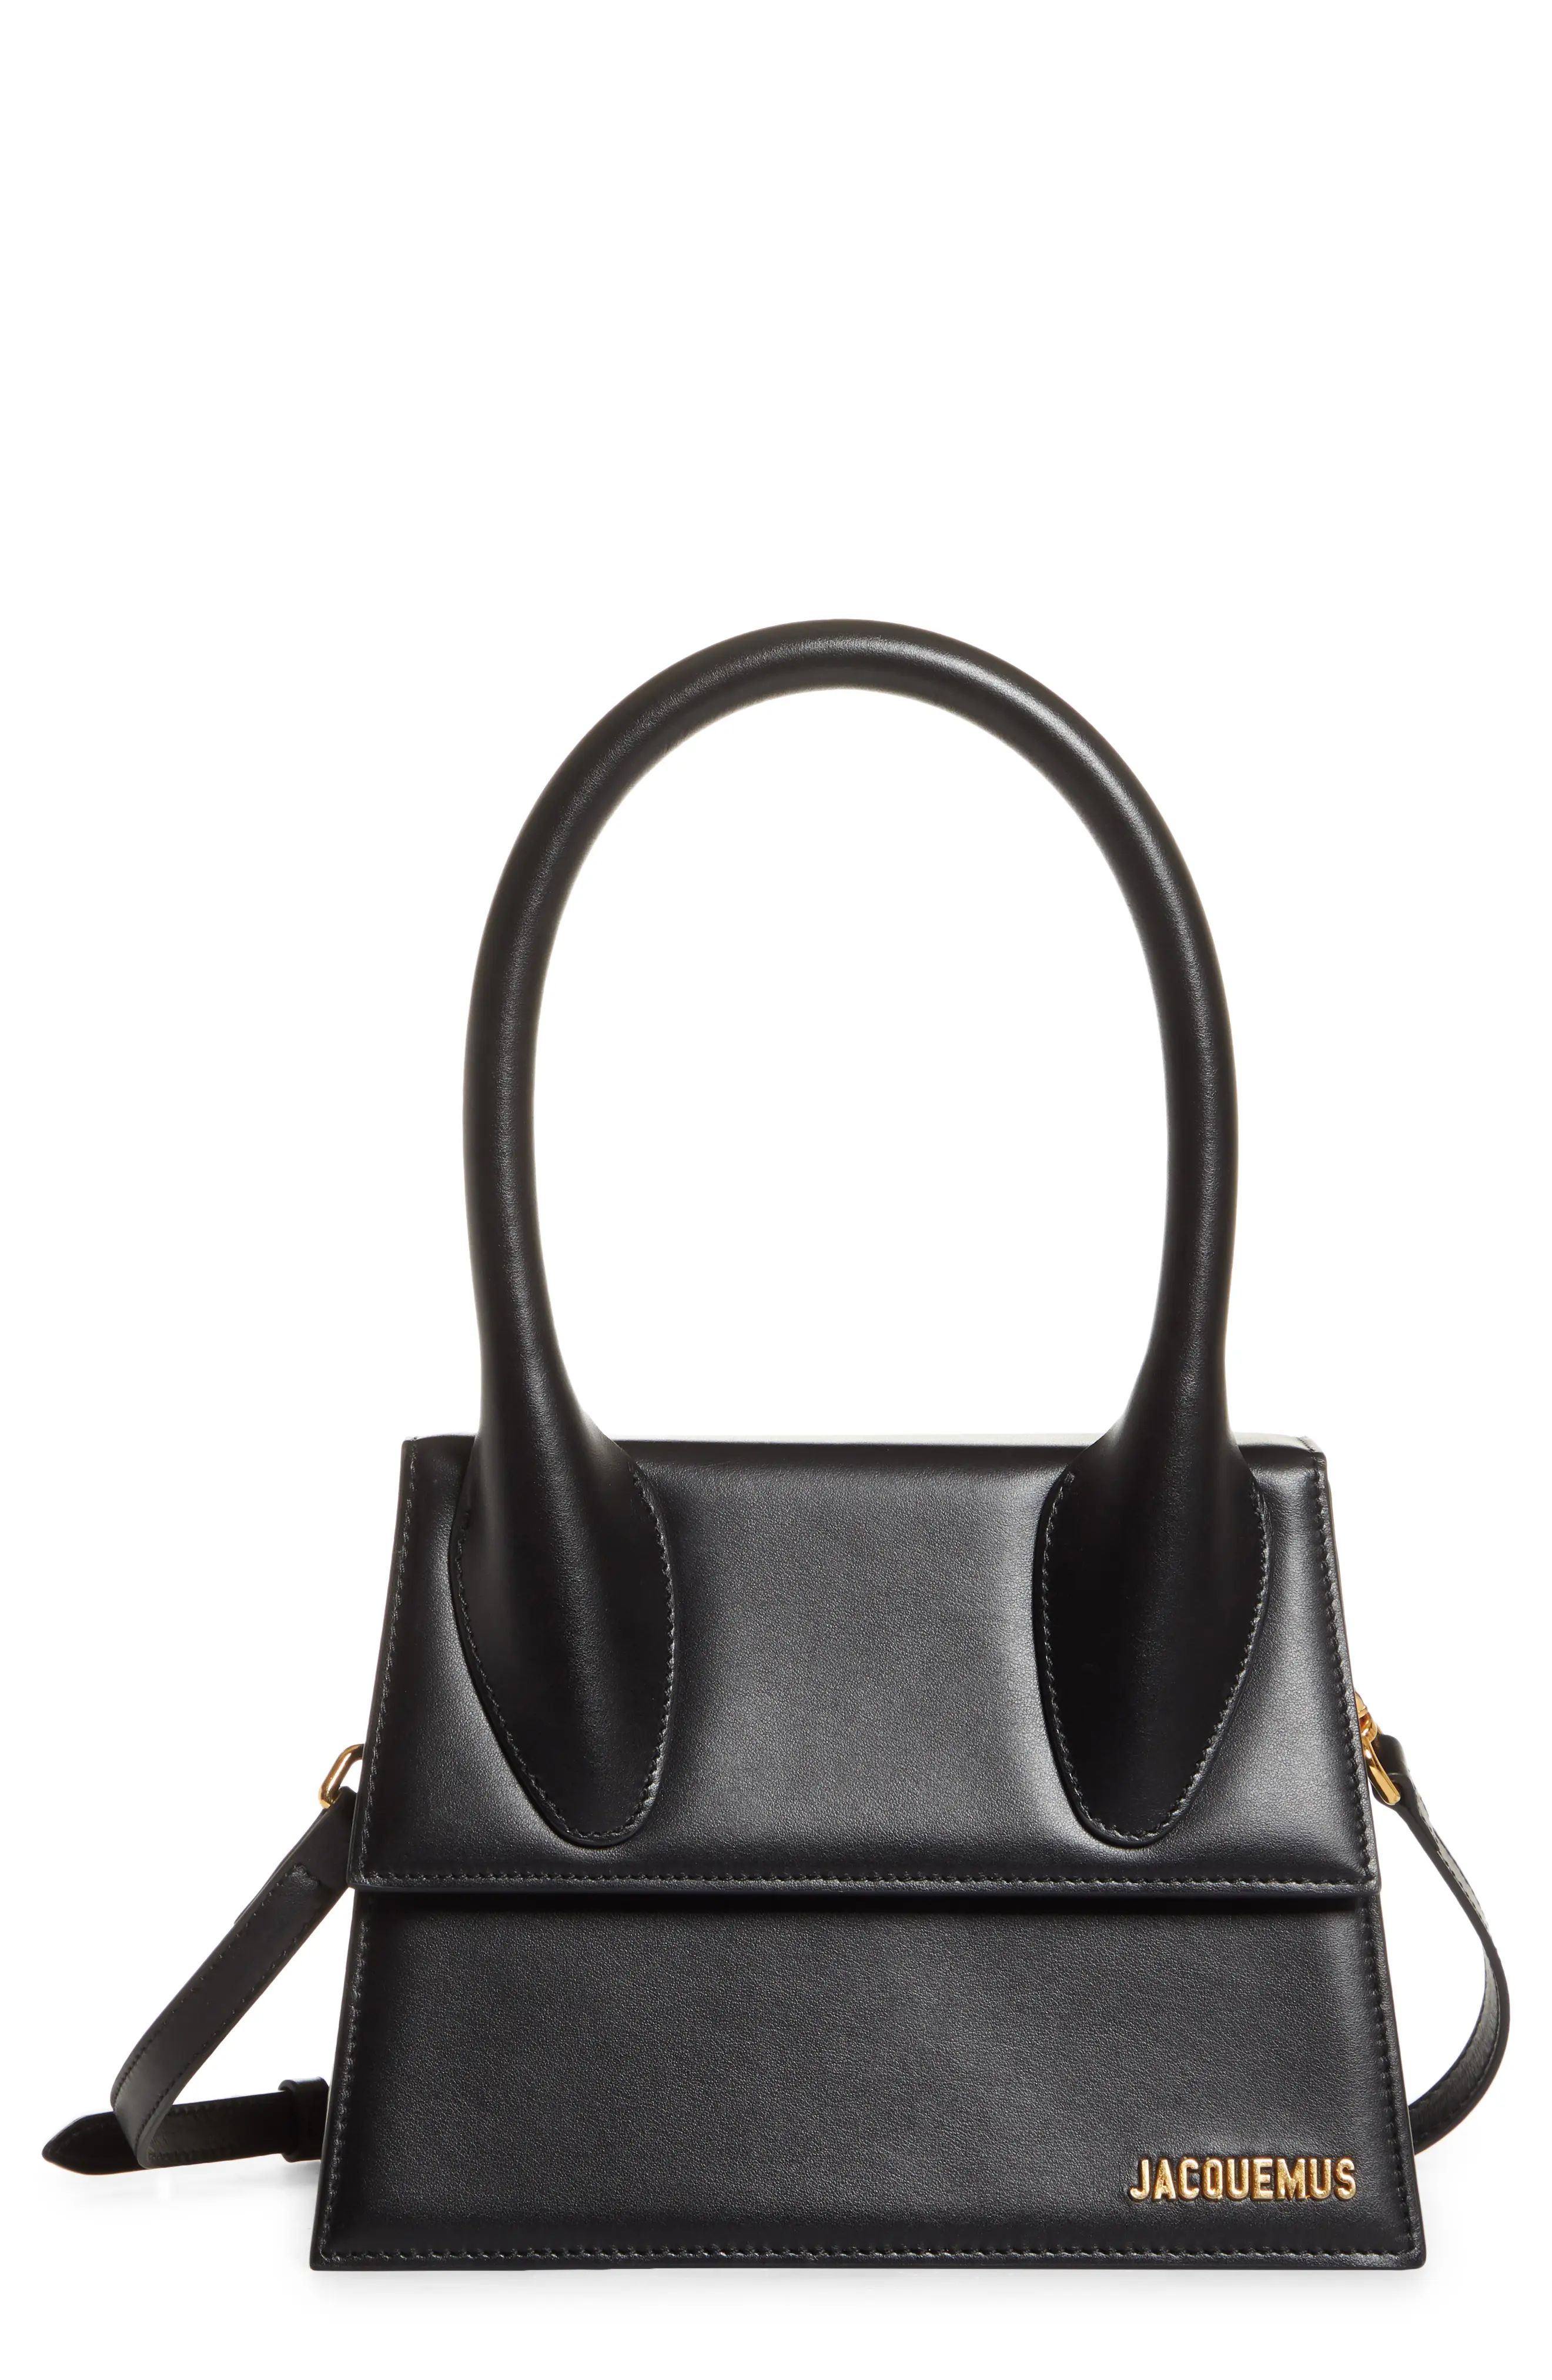 Jacquemus Le Grand Chiquito Leather Top Handle Bag in Black at Nordstrom | Nordstrom